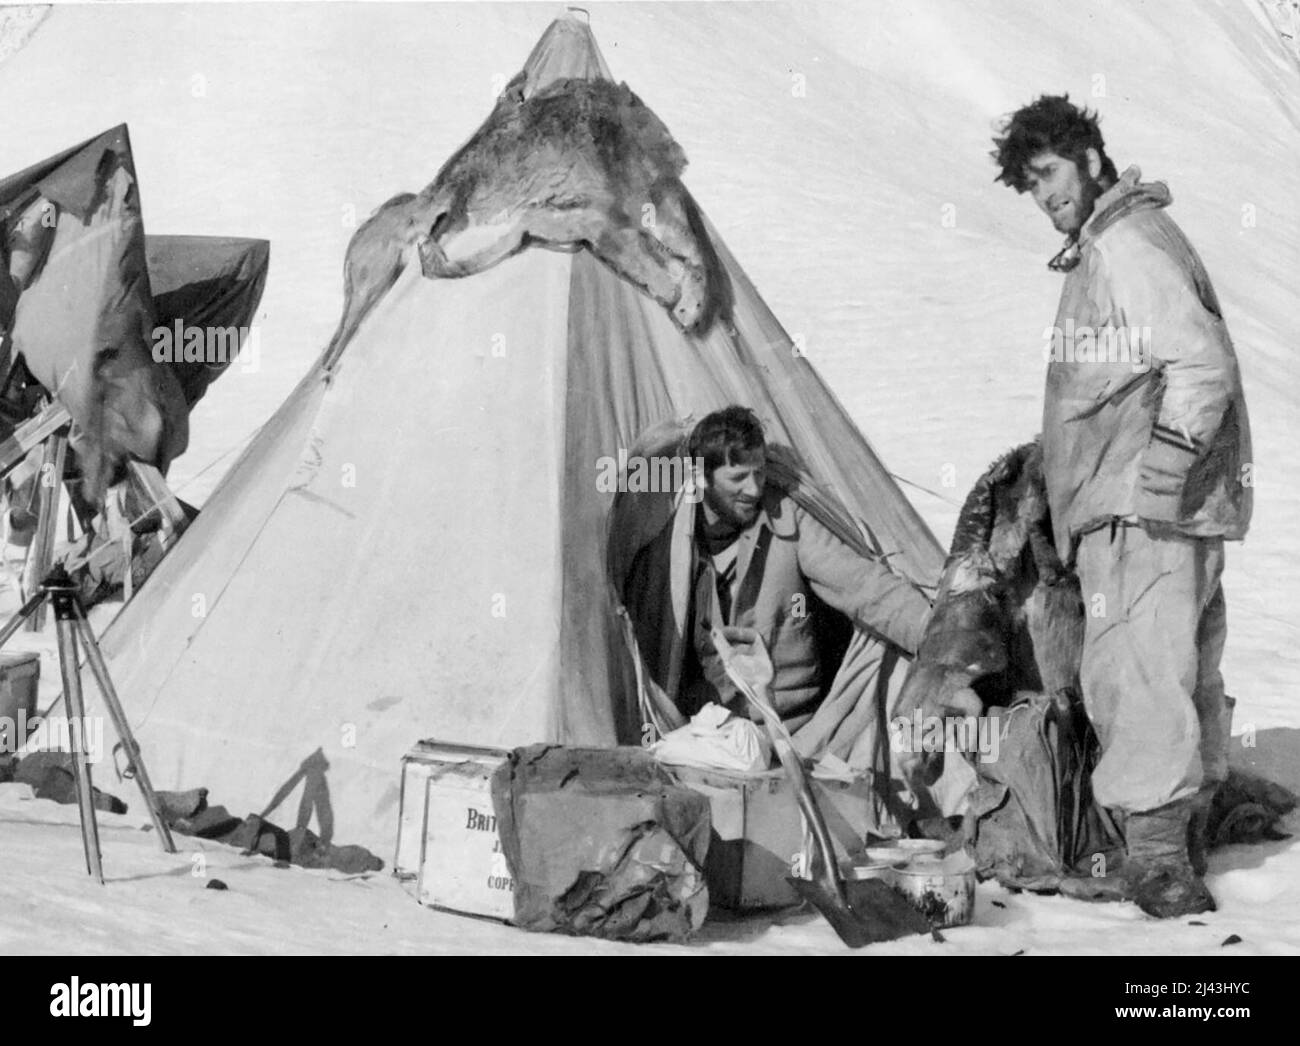 British arctic expedition Black and White Stock Photos & Images - Alamy